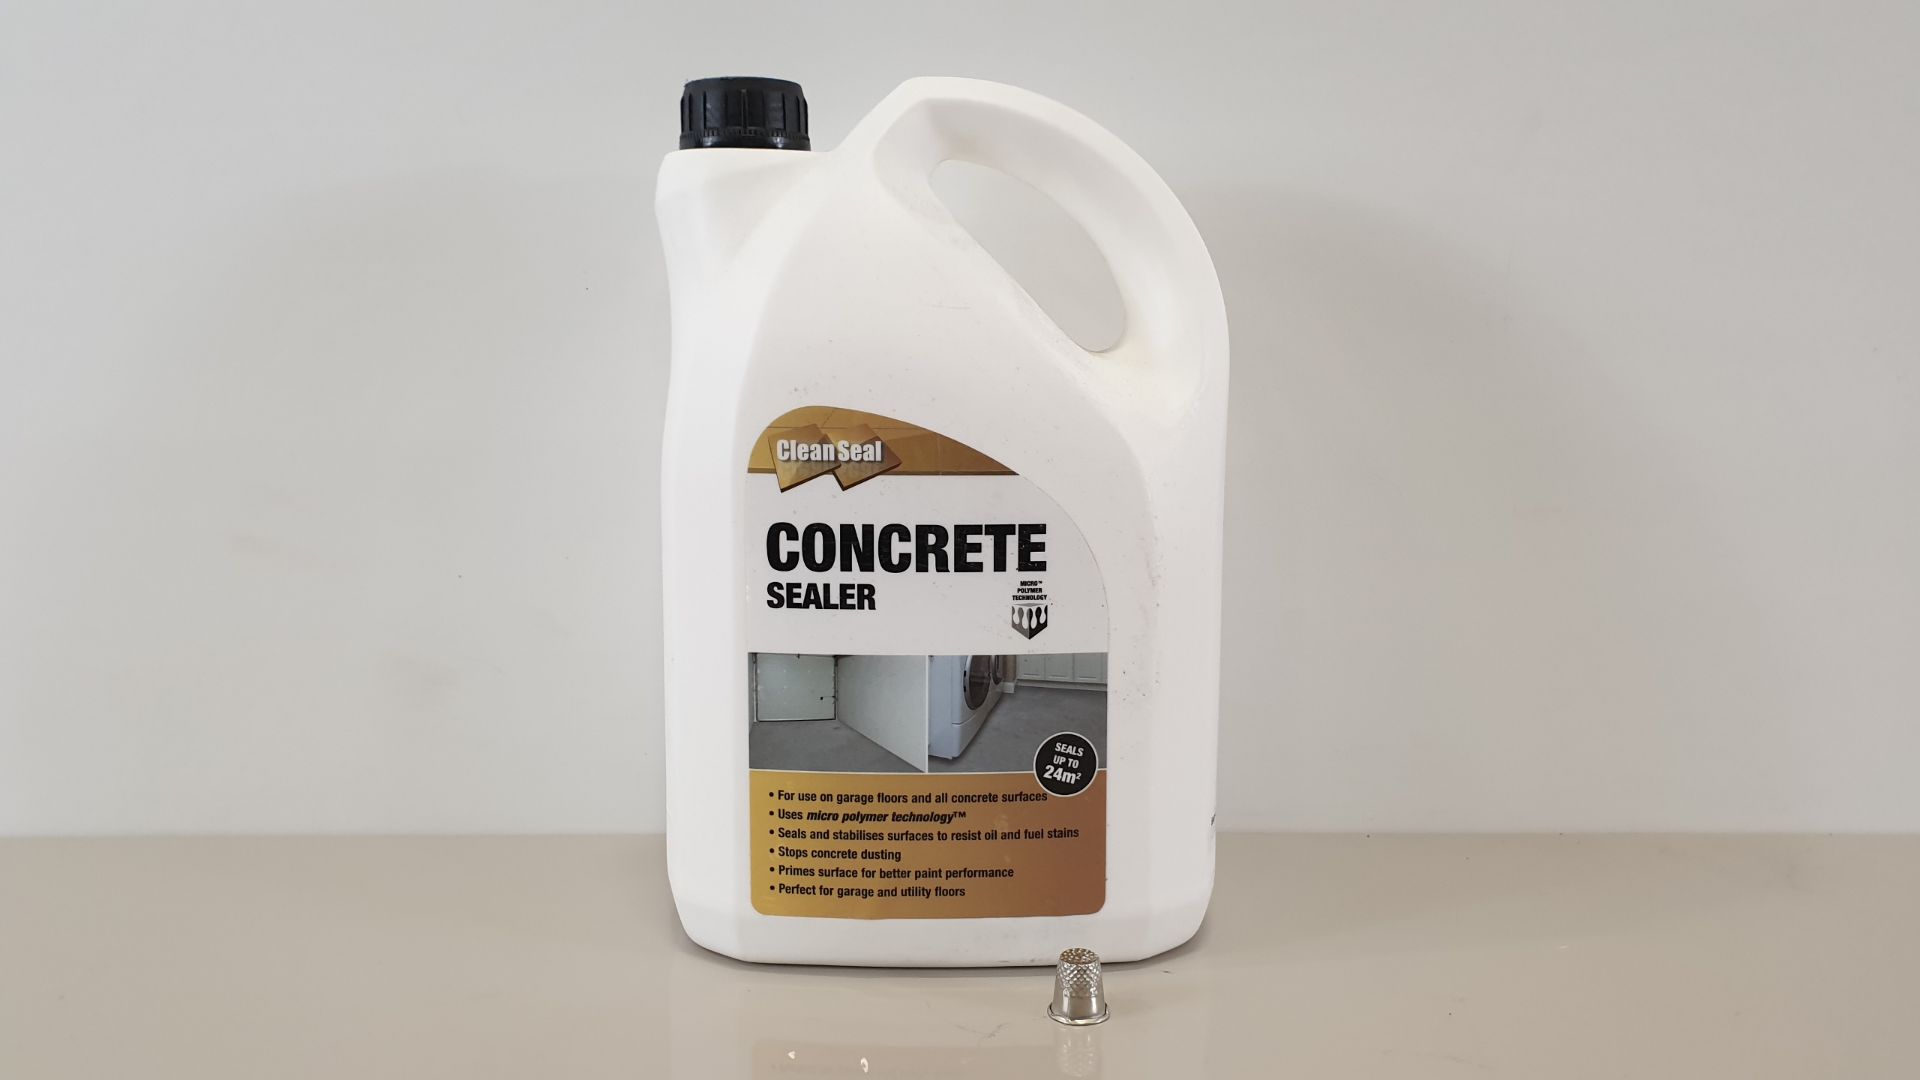 16 X 4 LITRE CLEANSEAL CONCRETE SEALER - IN 4 CARTONS (EACH CLEANS UP TO 24 M/2)